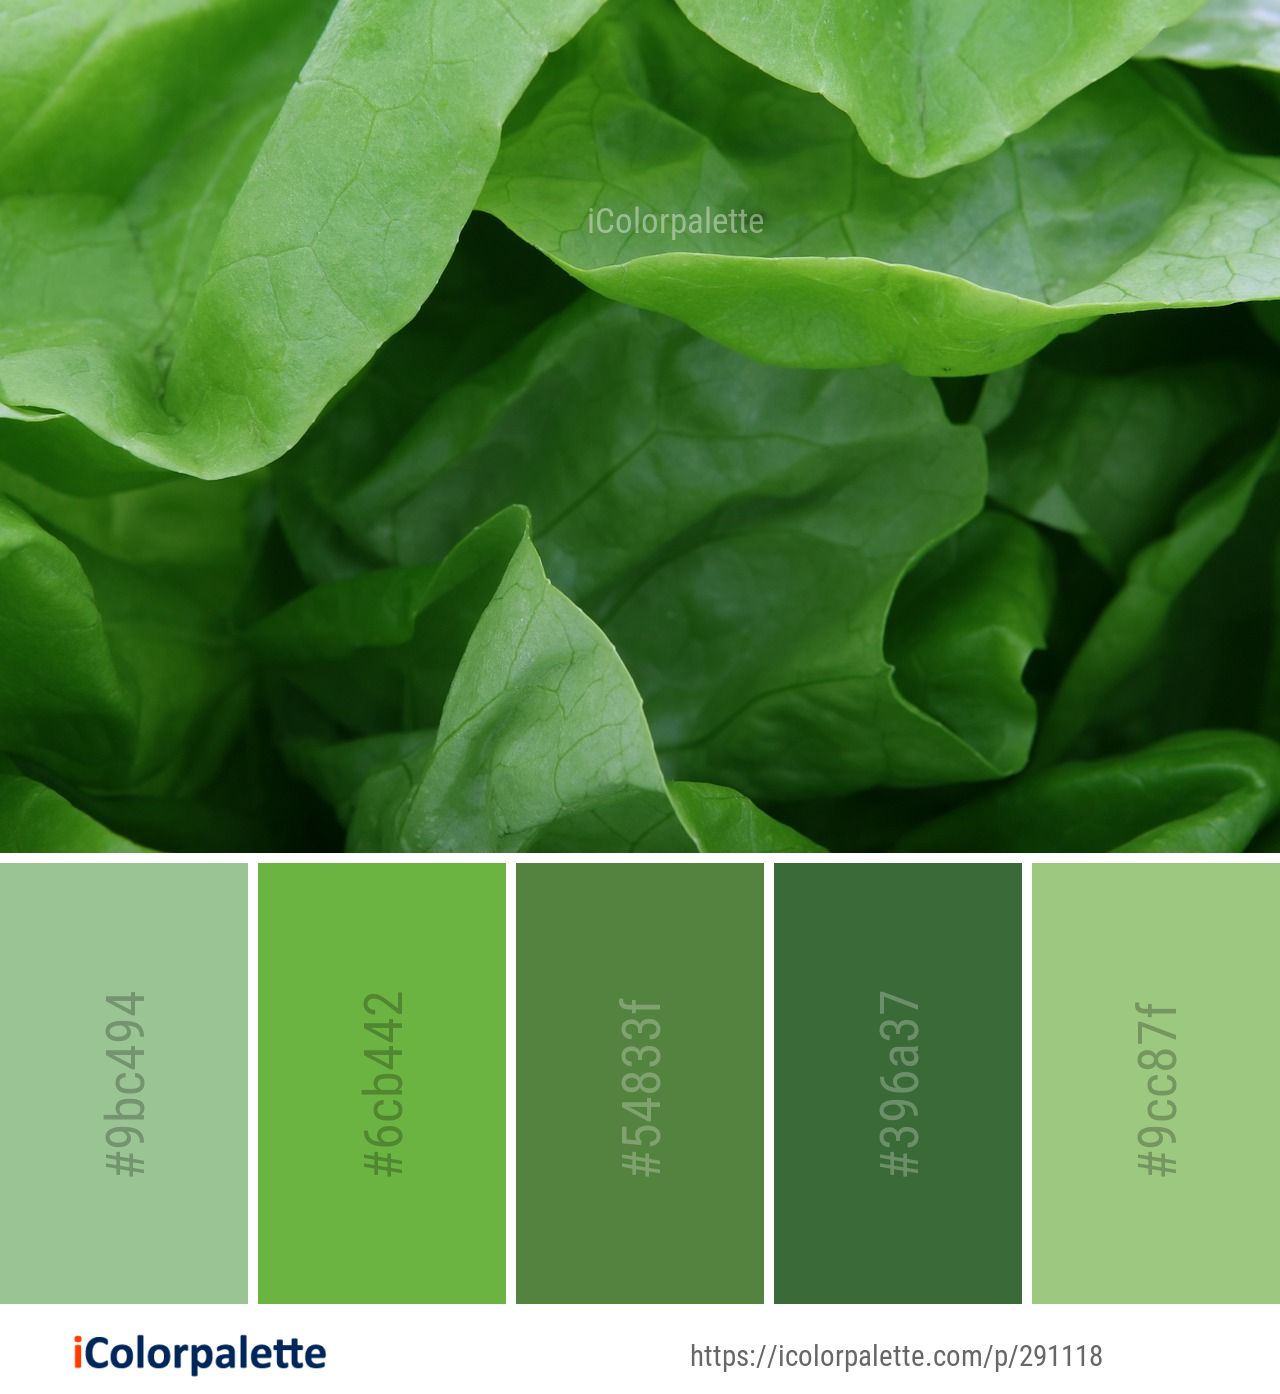 Color Palette Ideas from Green Leaf Plant Image | iColorpalette